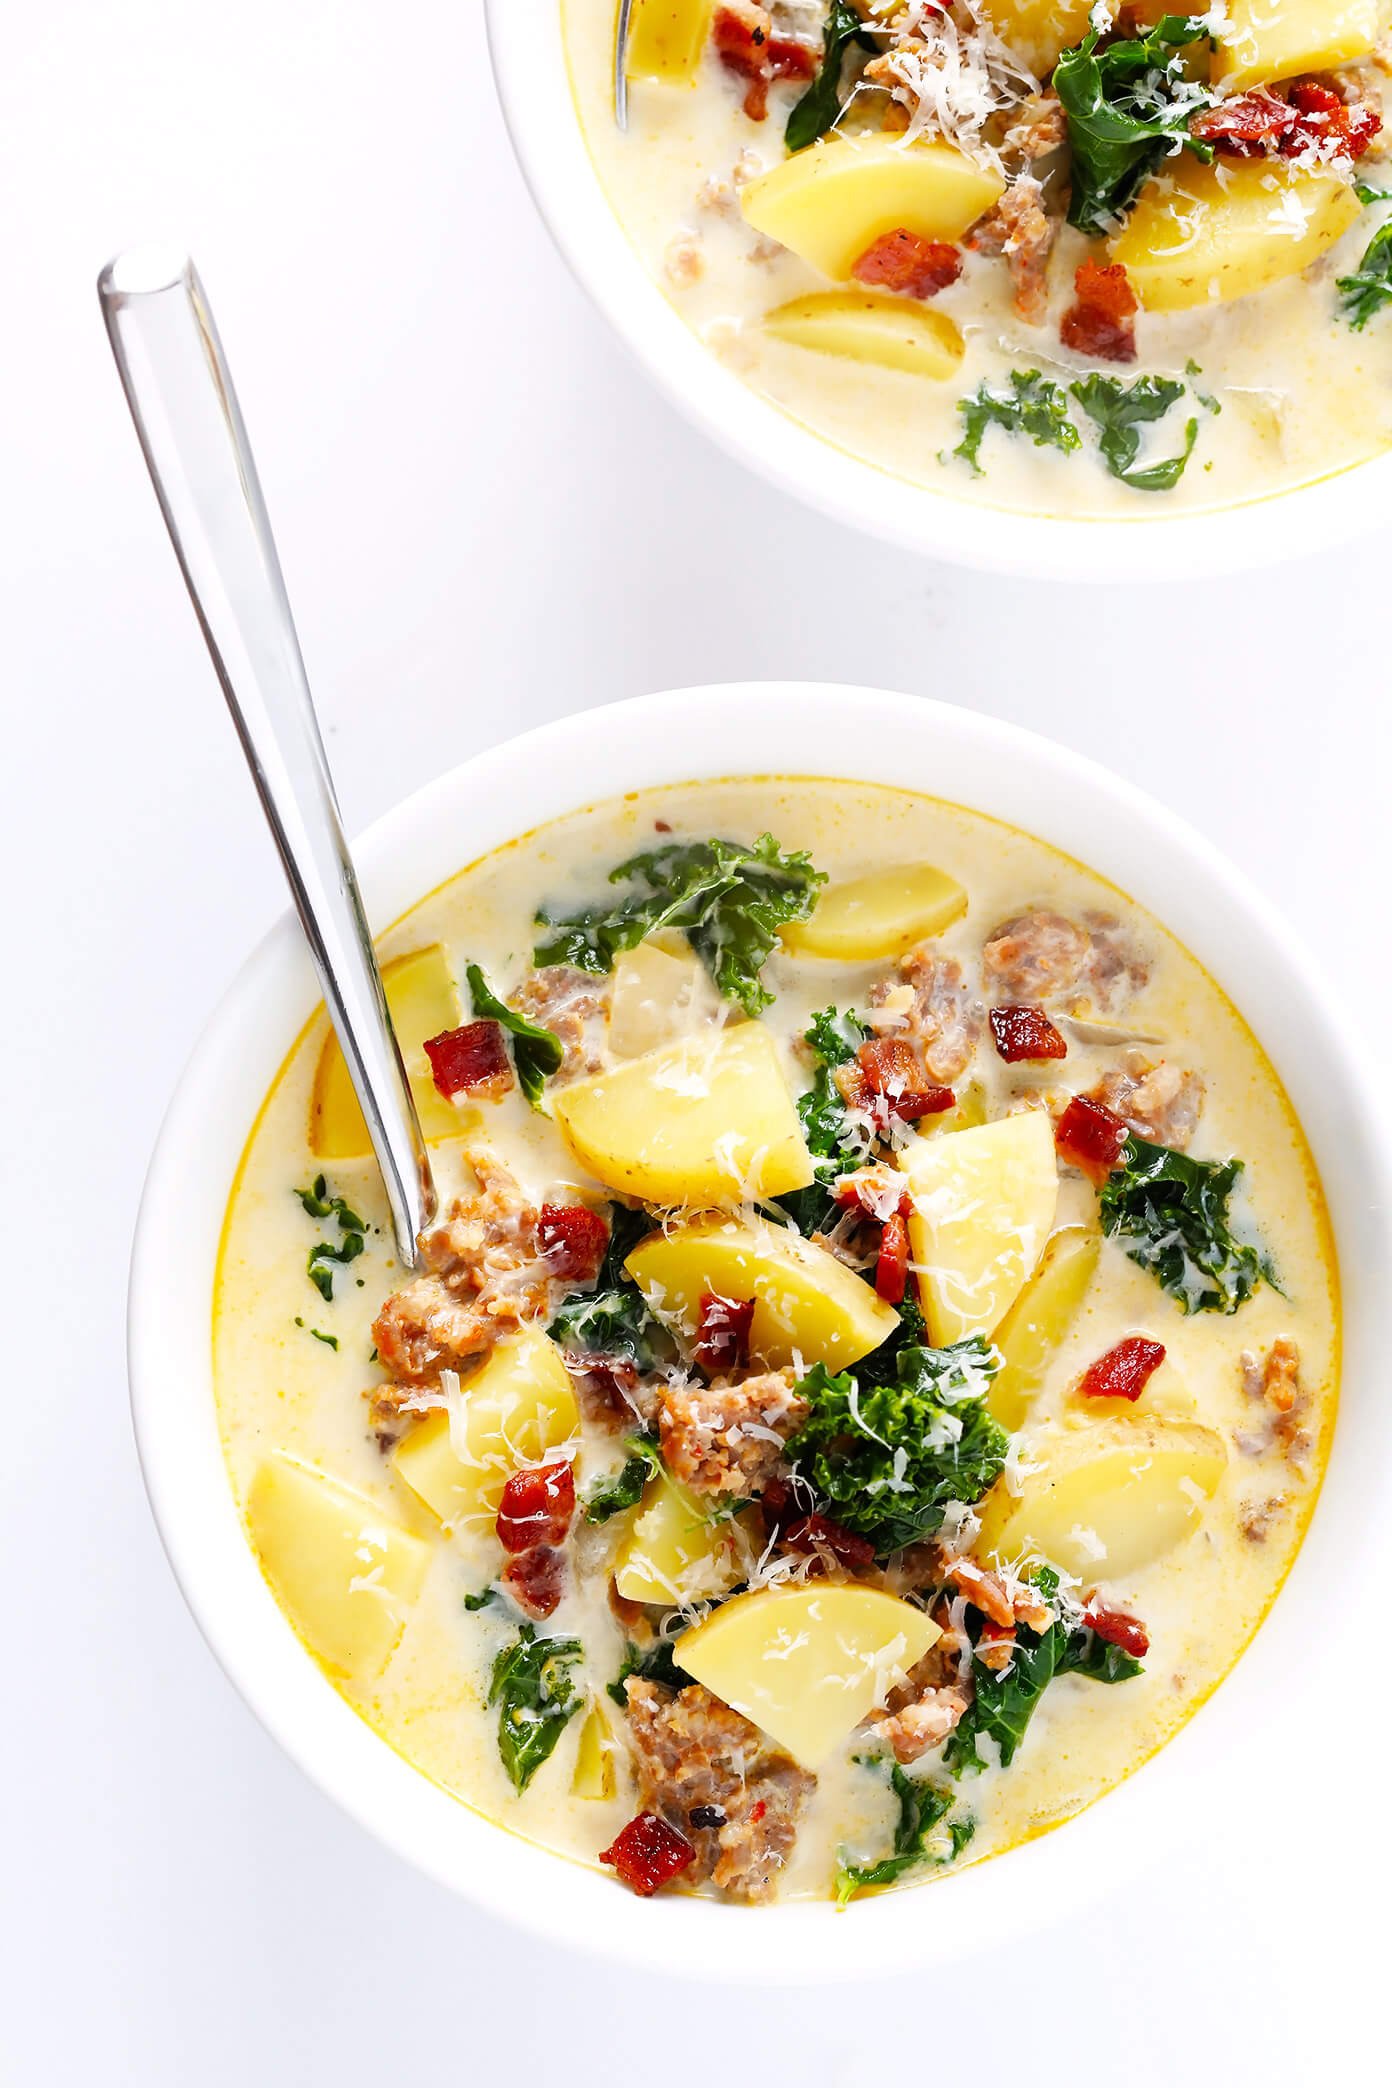 Learn how to make this favorite Olive Garden soup on the stovetop or in the slow cooker! This Zuppa Toscana recipe is super easy to make, naturally gluten-free, and full of the most delicious zesty, creamy flavors. So grab some Italian sausage, kale, potatoes, bacon, Parmesan, and garlic, and make it happen! Crock-pot instructions also included.